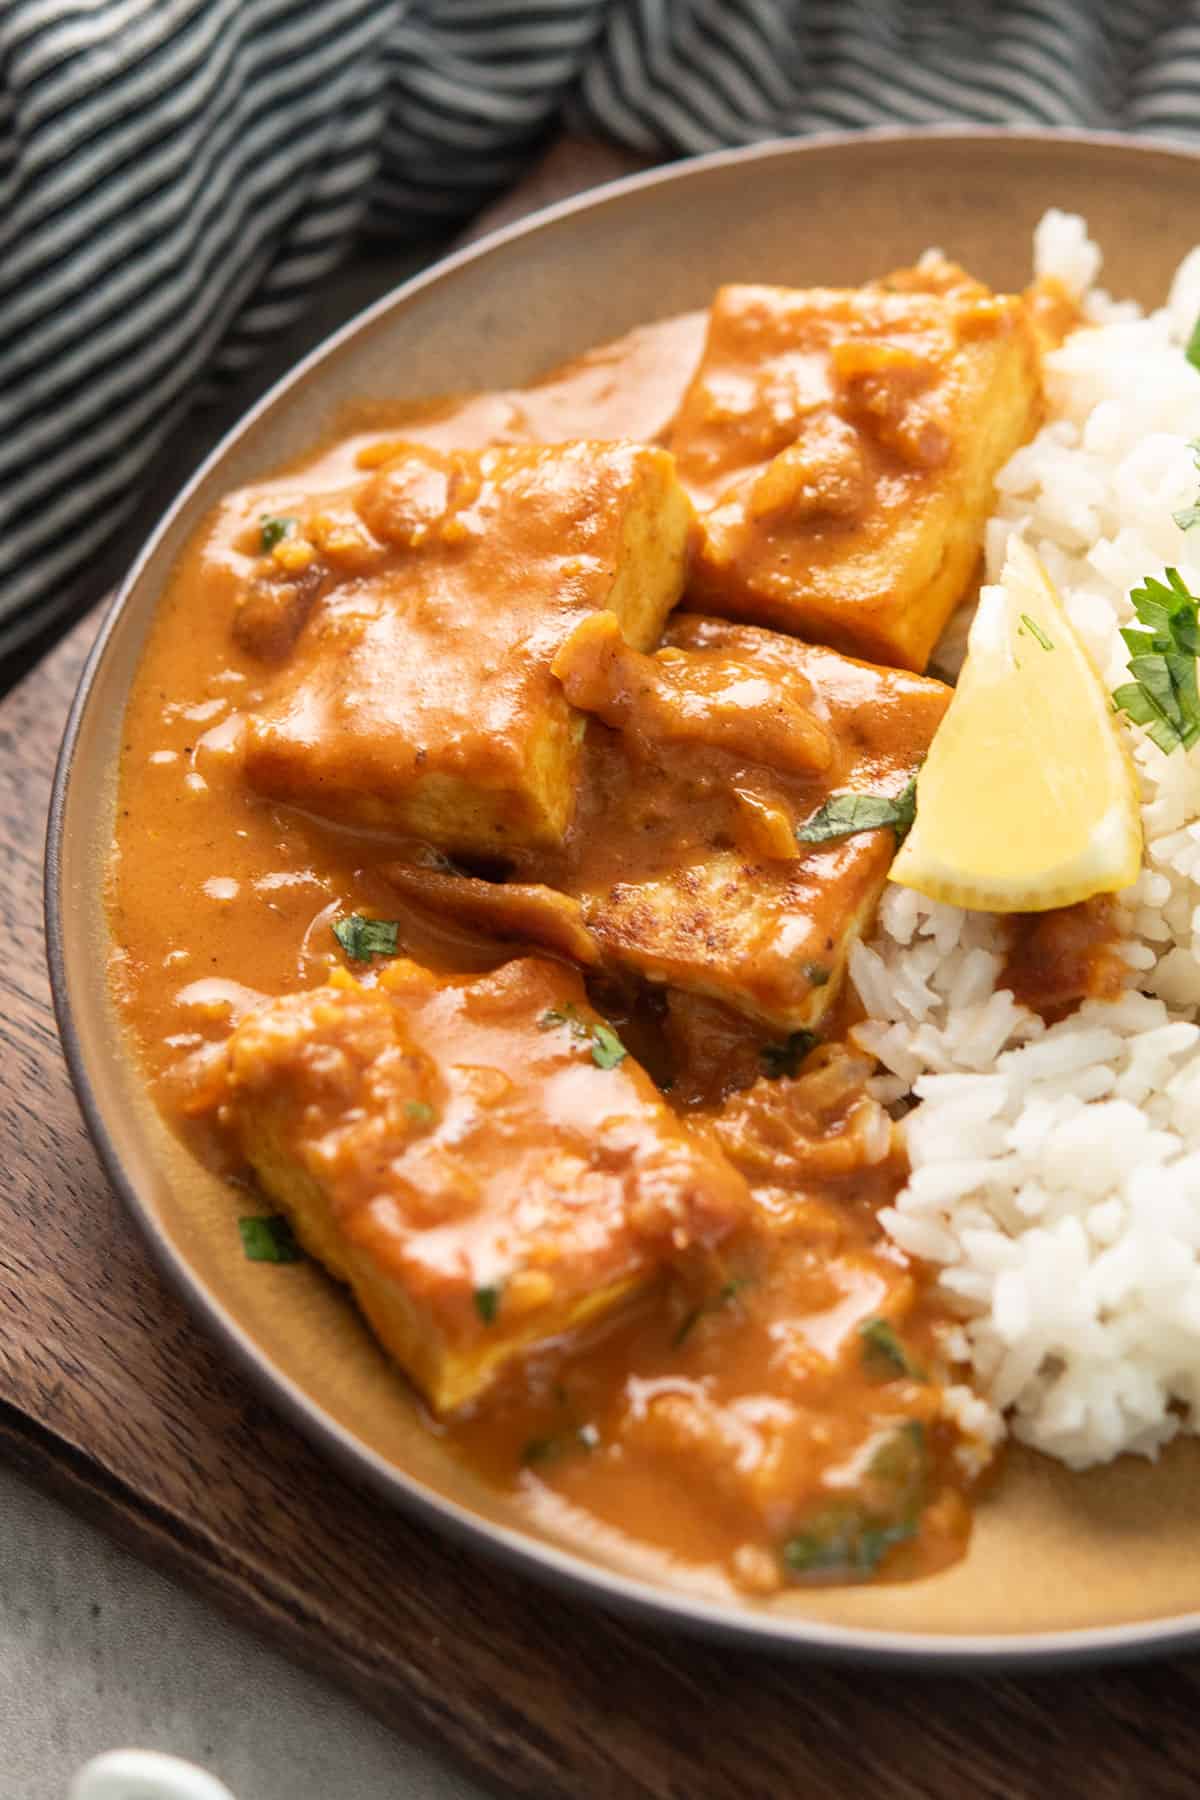 This spicy, creamy, delicious tofu curry served over bed of rice